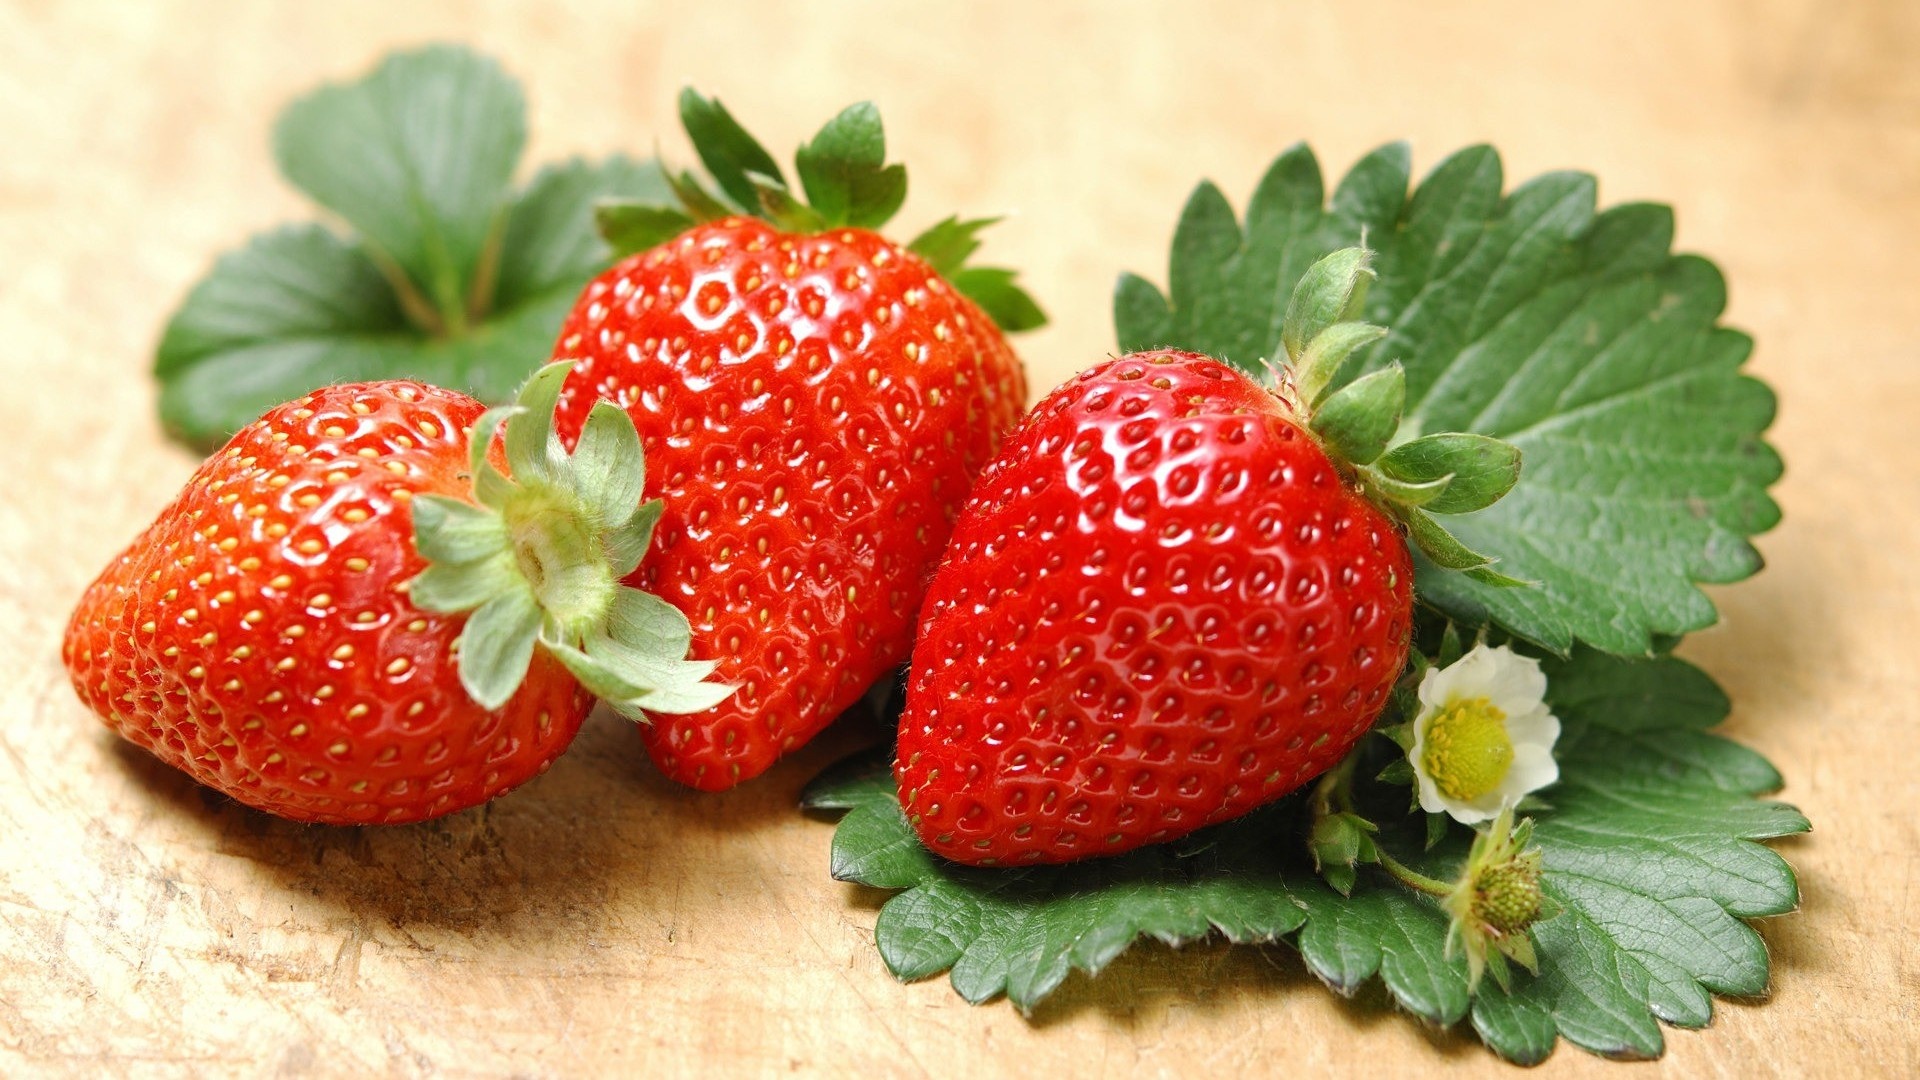 Strawberry: Fruits are associated with romance and love, Plant. 1920x1080 Full HD Wallpaper.